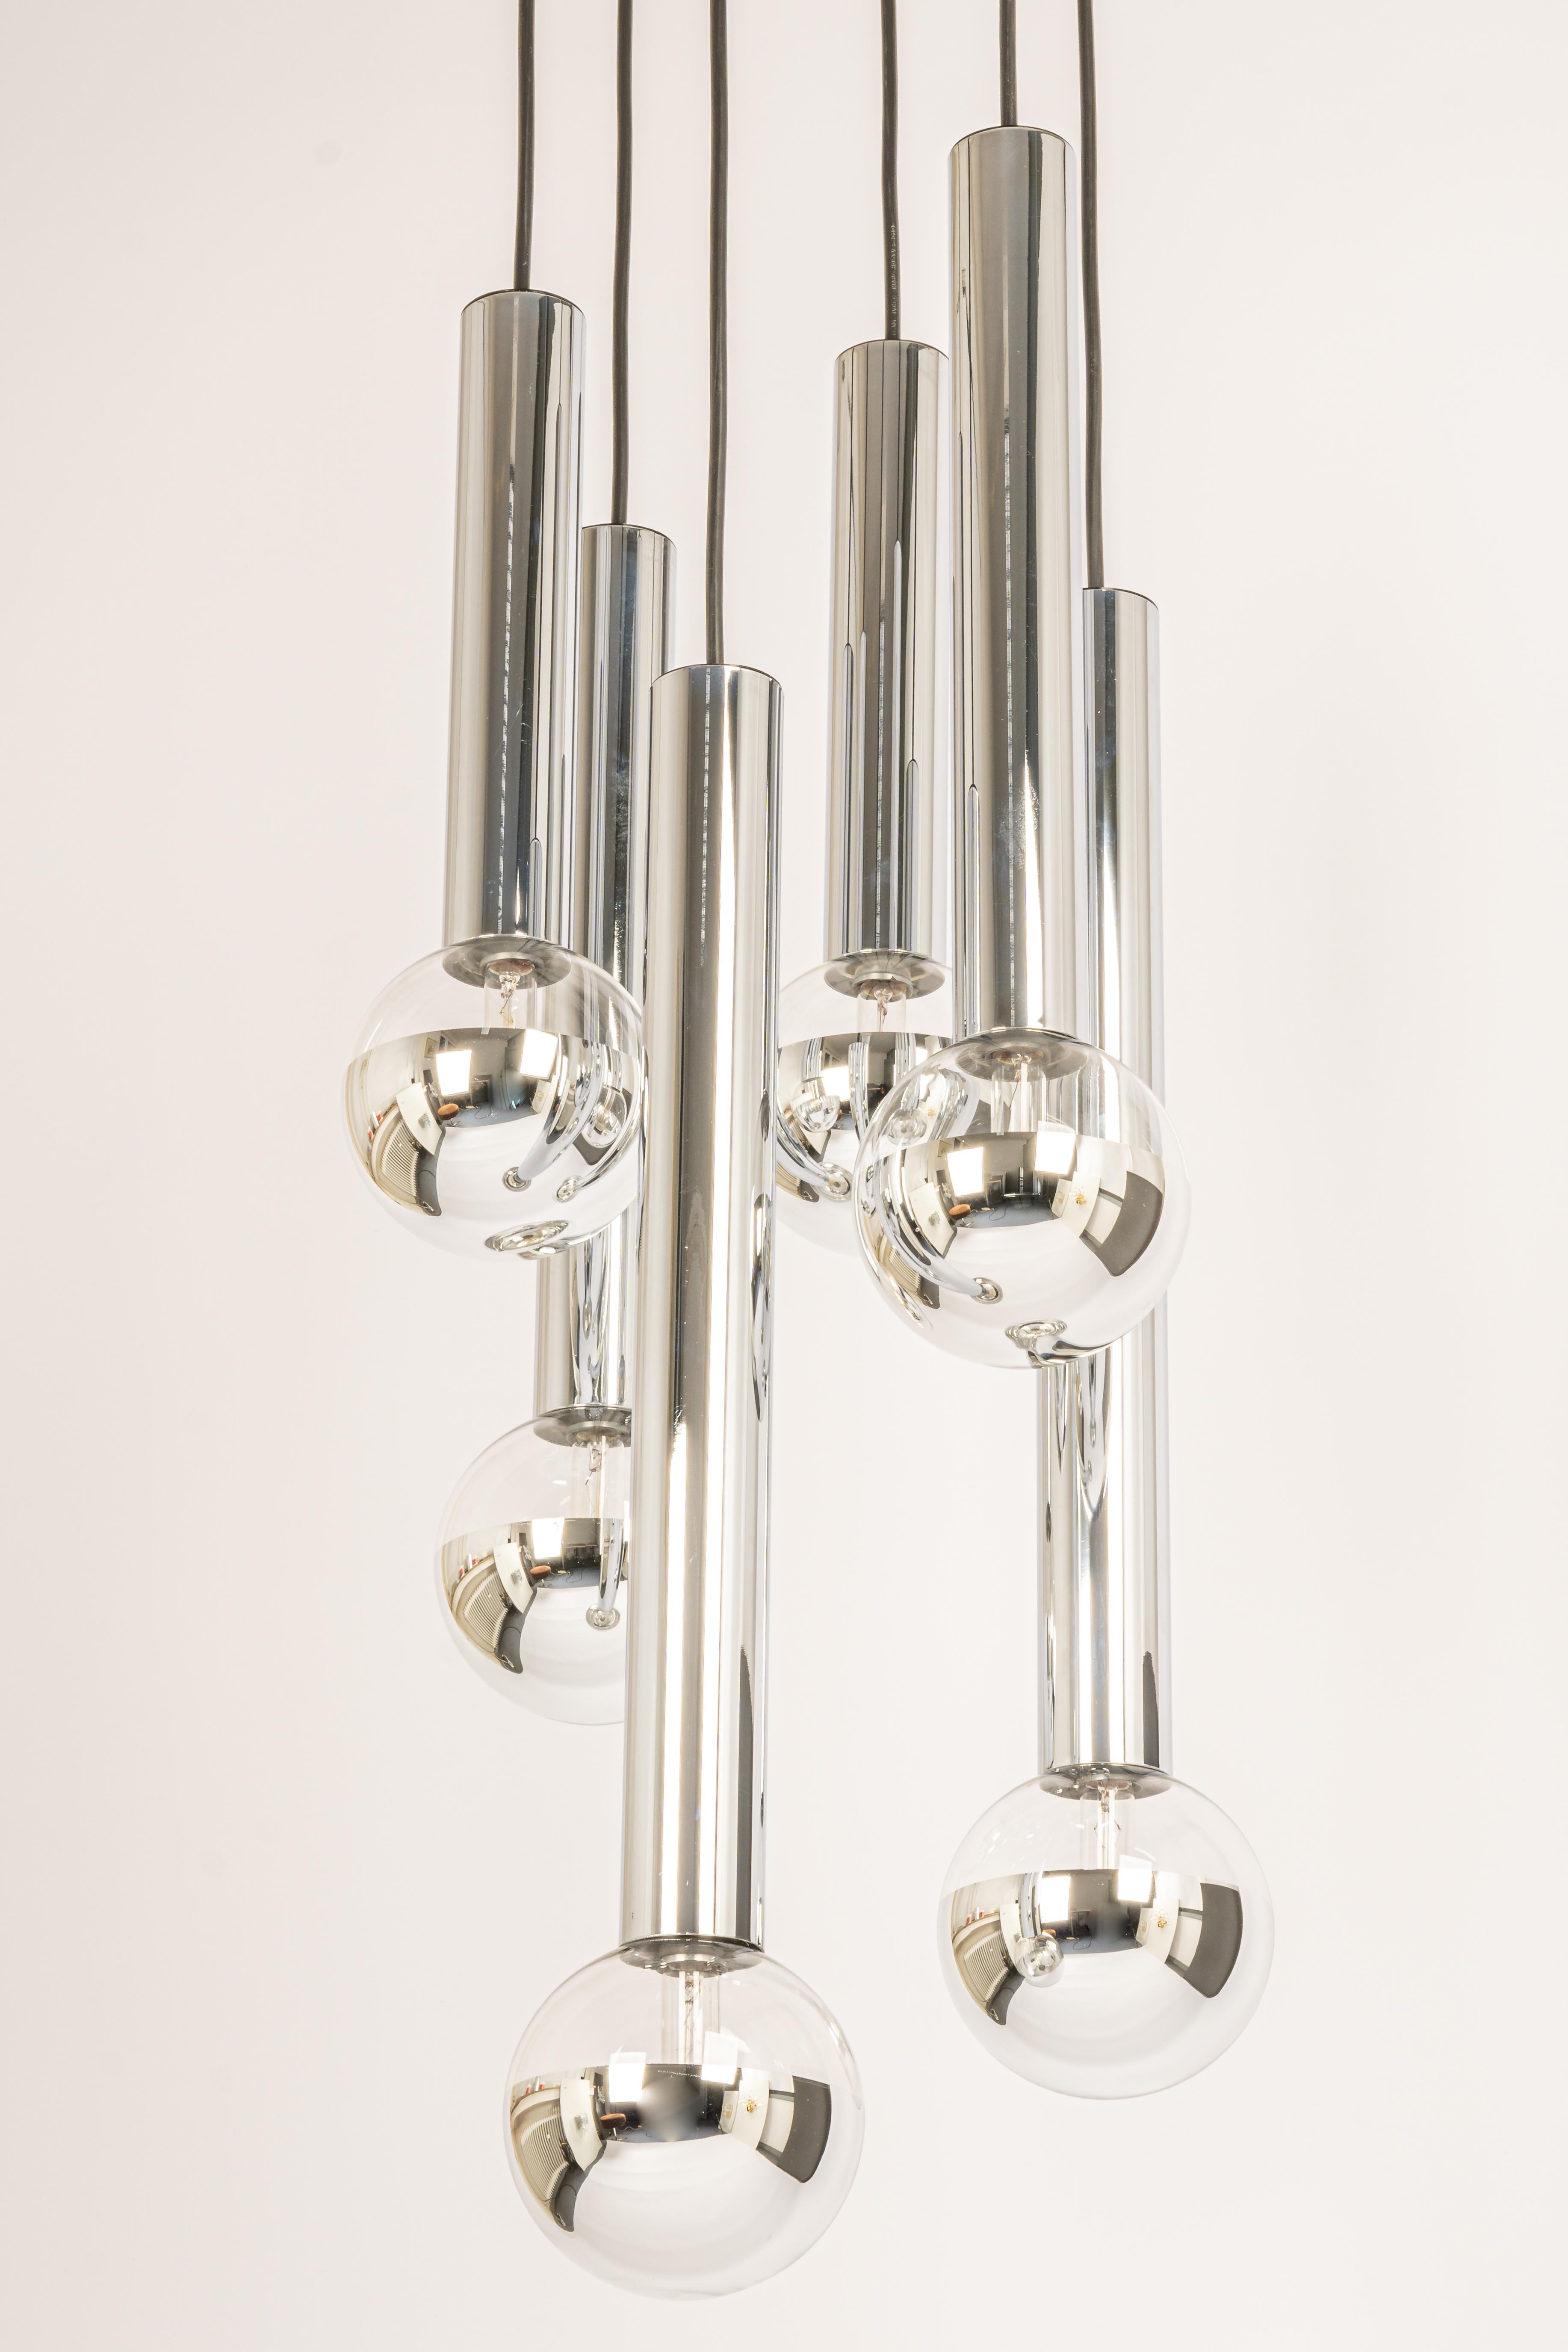 A special large cascading chandelier designed by Motoko Ishii for Staff Leuchten, manufactured in Germany, circa the 1970s with 6 round bubble Clear glasses.
Wonderful form and stunning light effect.
Sockets: 6 x E14 small bulbs. (40 W max for